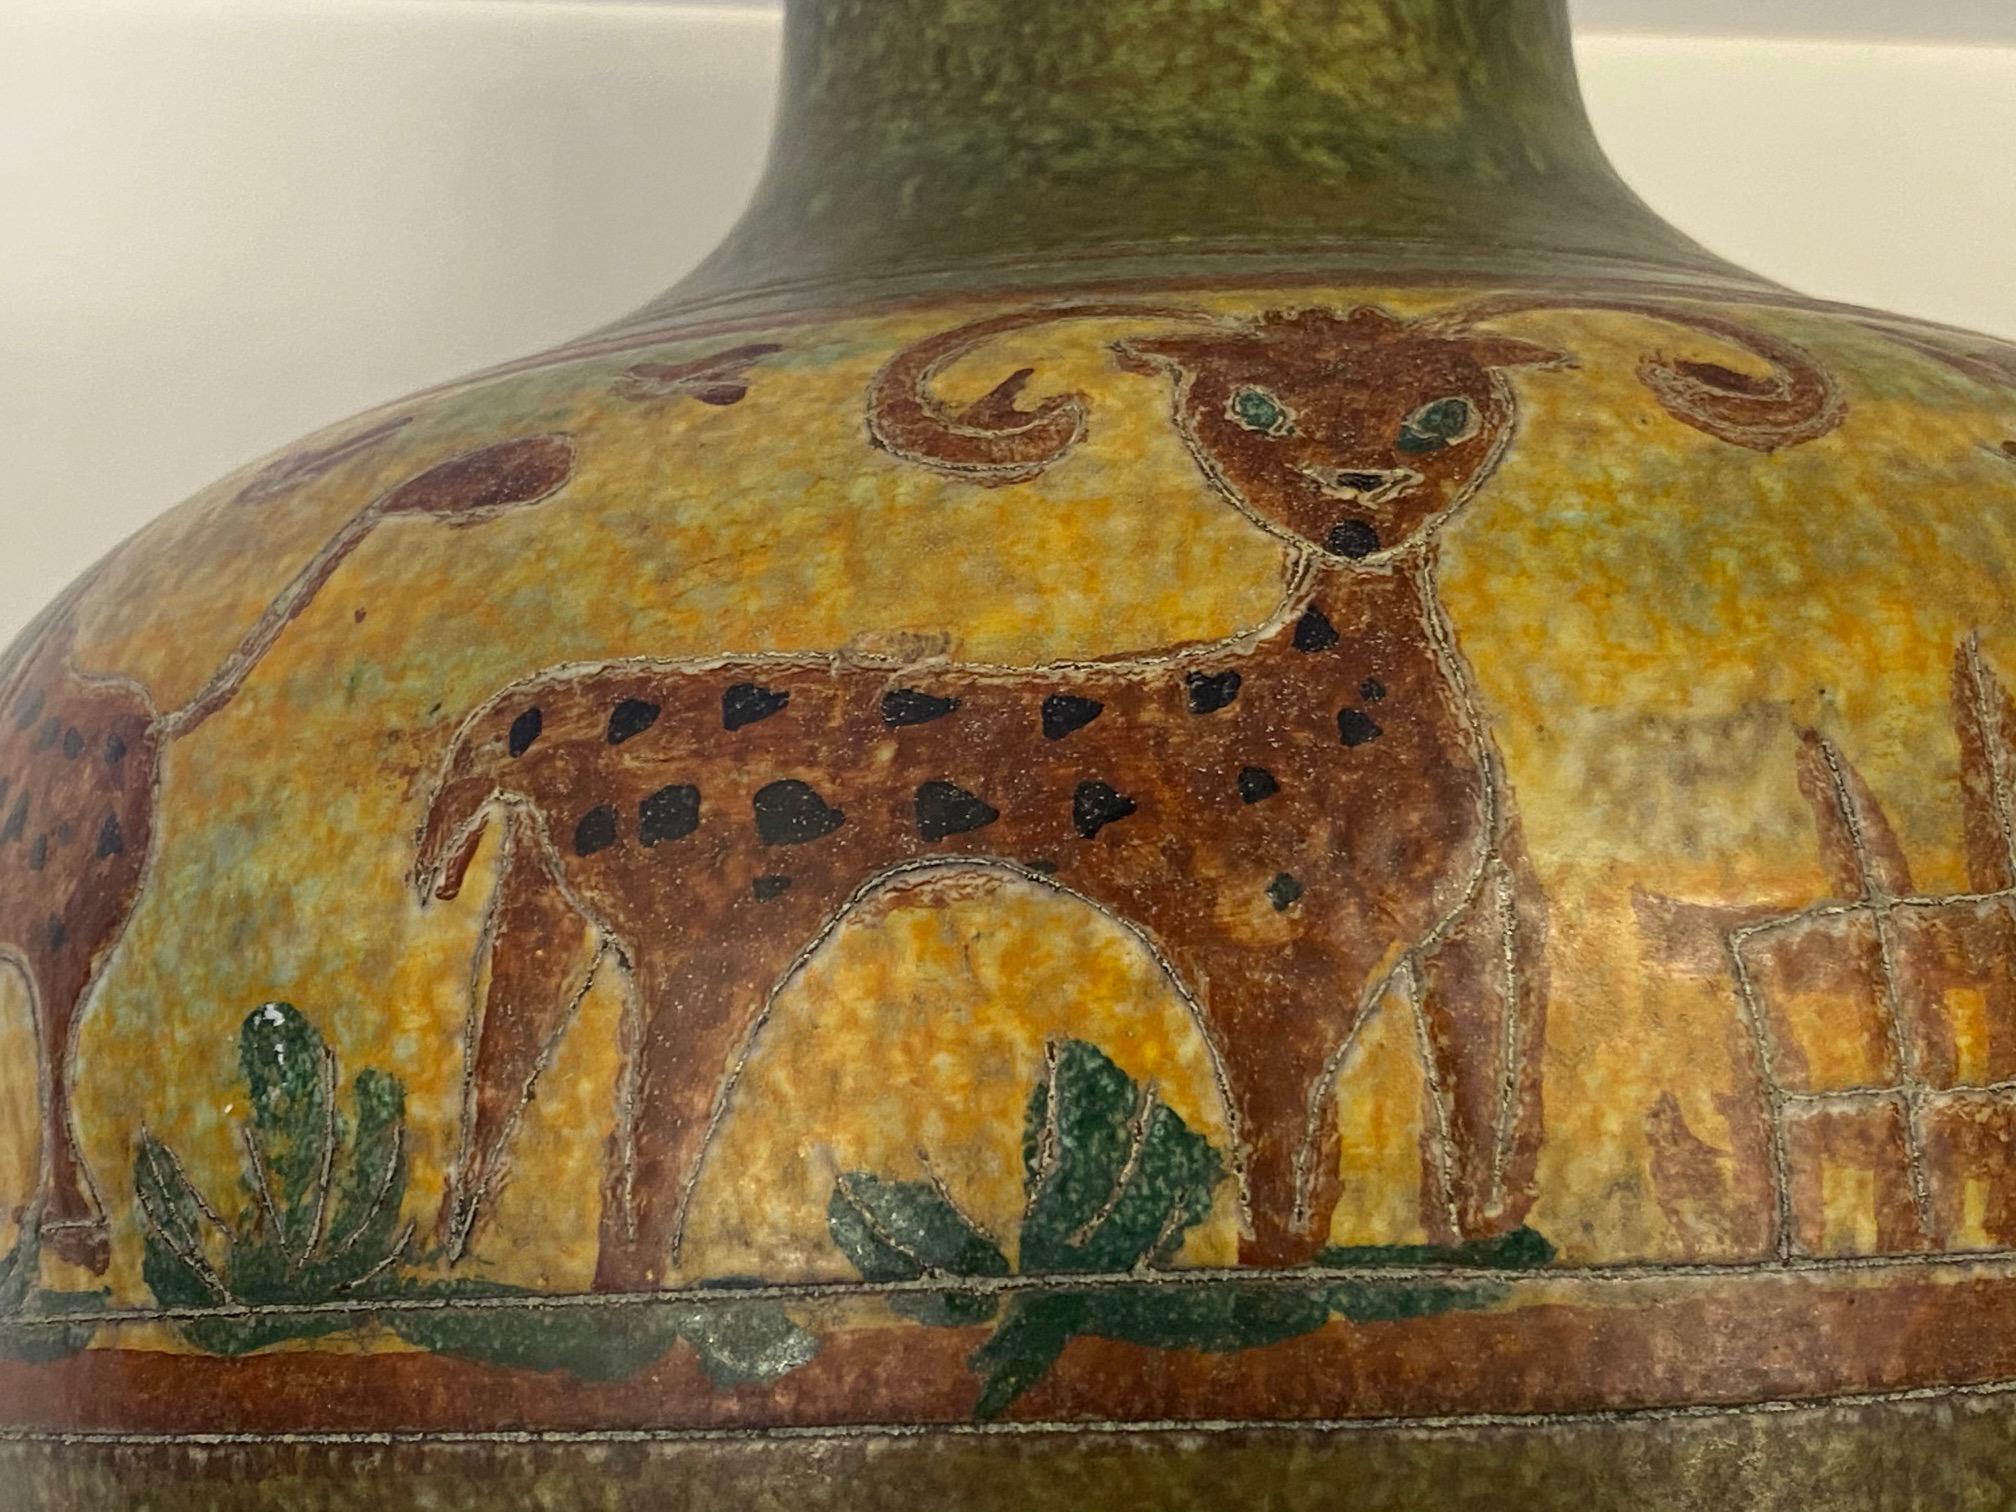 A striking large beautifully decorated hand thrown Italian pottery vase having charming naive style animals in earth tones including green, brown and yellow. Top opening 4.25